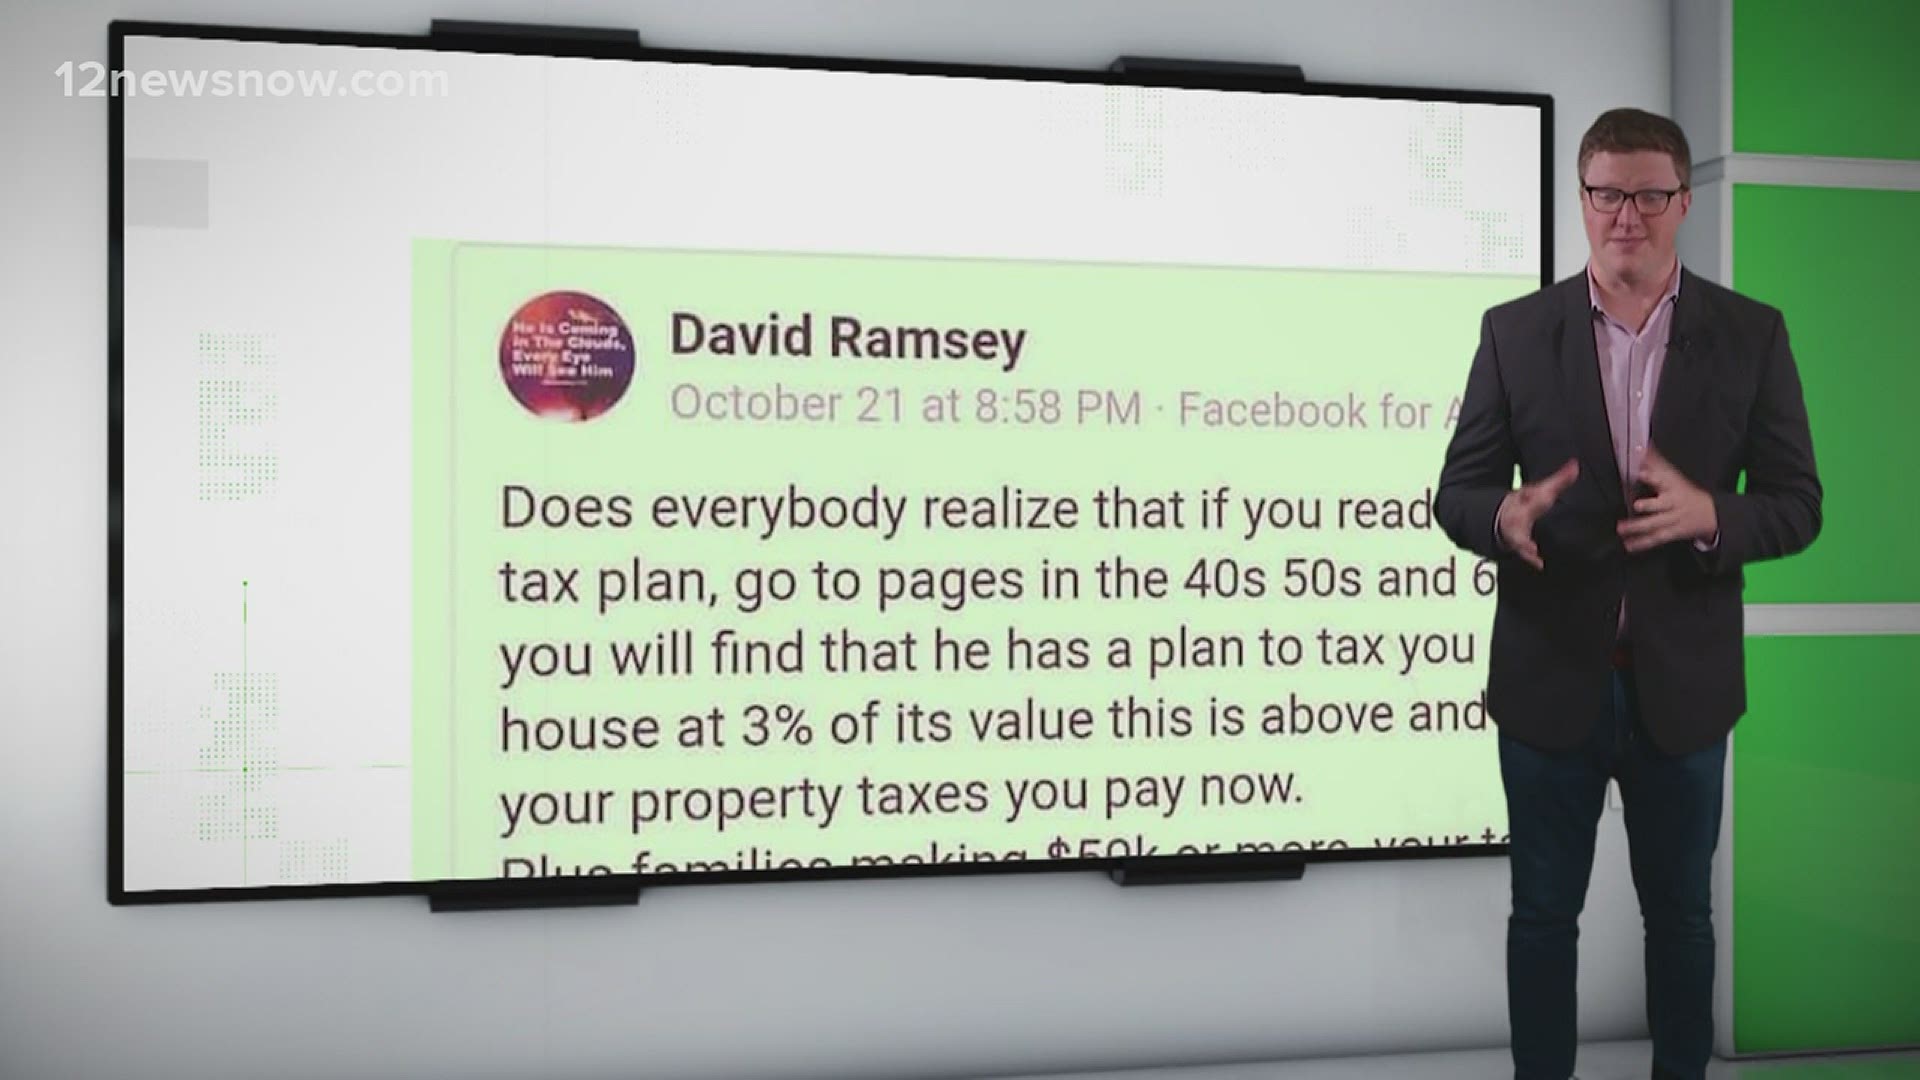 Facebook posts have falsely claimed Biden's tax plan will increase property taxes. It does not and in fact the federal government doesn't collect property taxes.